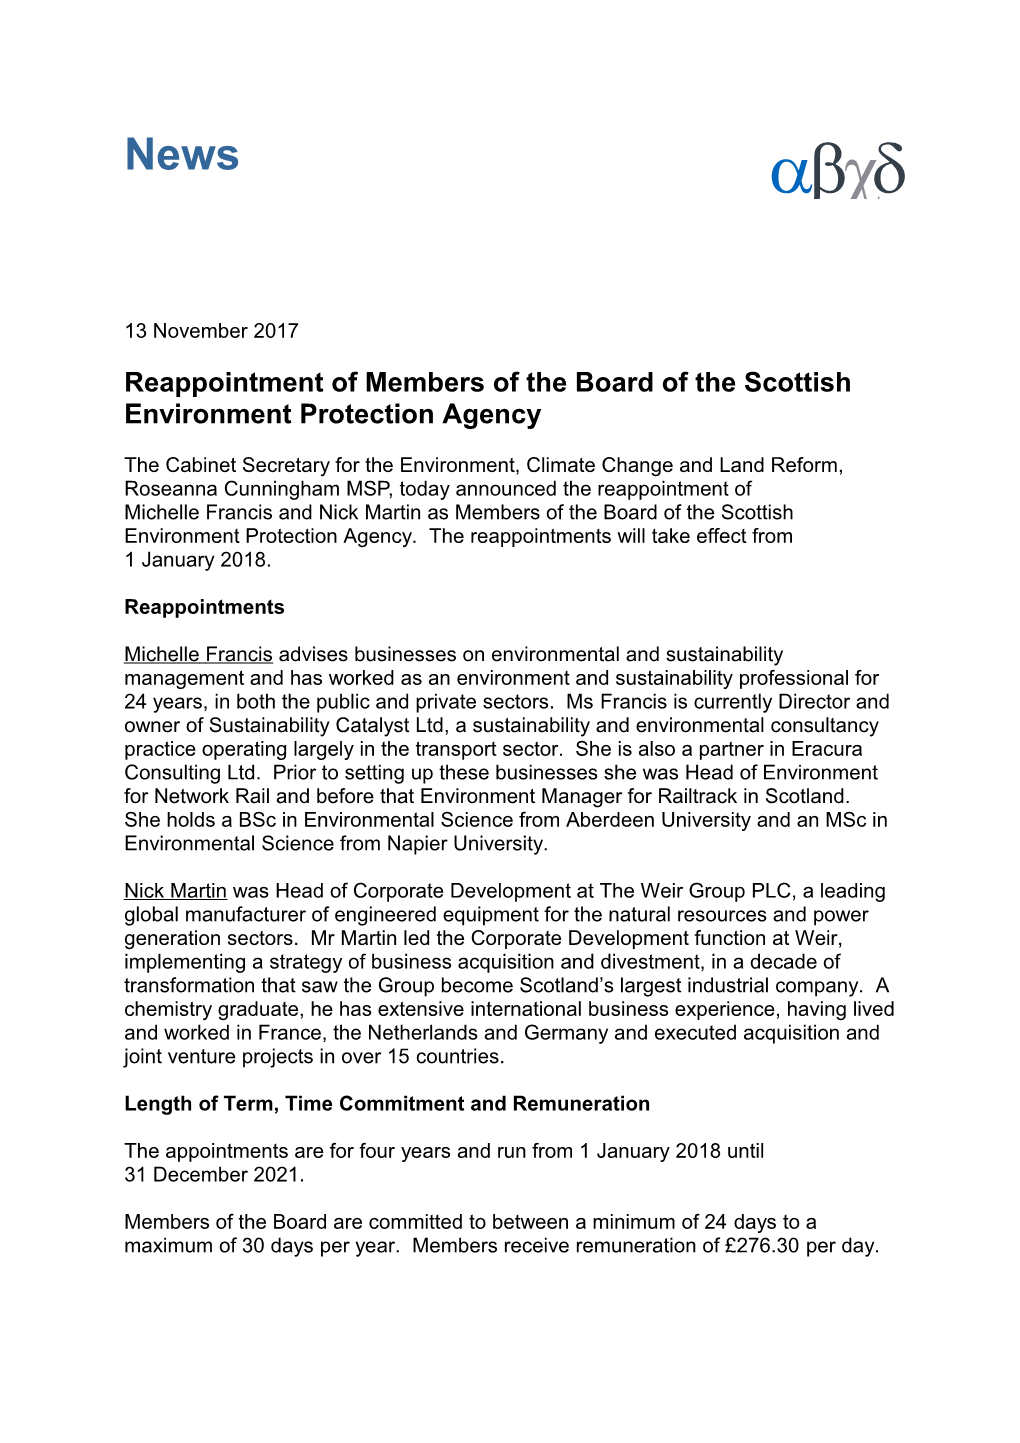 Reappointment of Members of the Board of the Scottish Environment Protection Agency